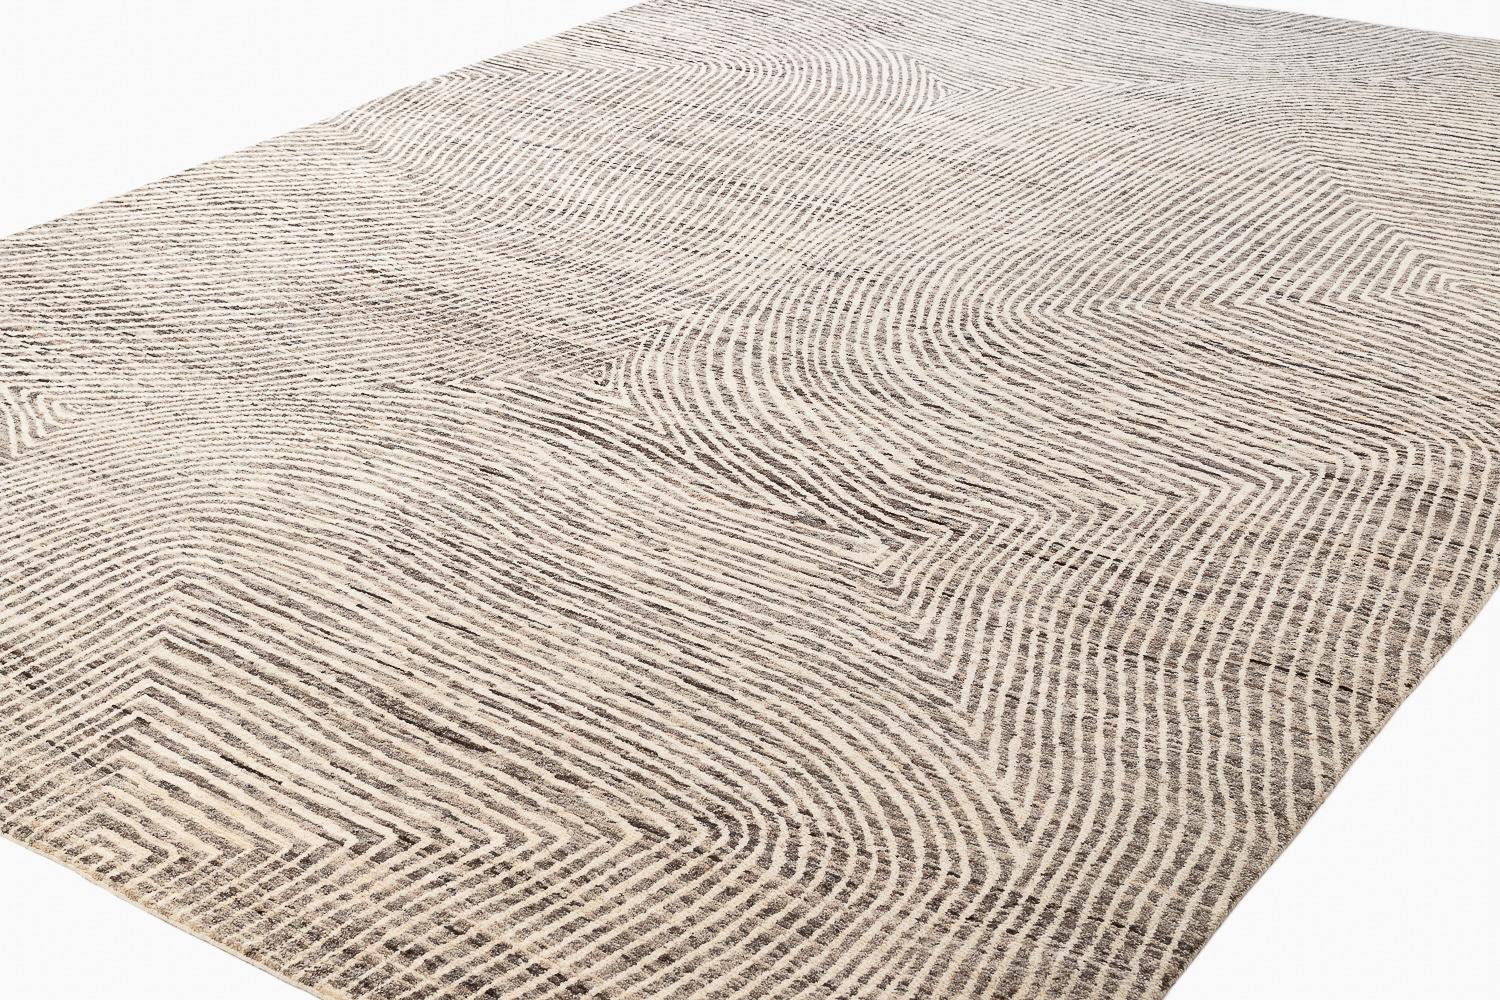 A labyrinth of organic lines create energy and texture in one of the newest additions to the Carini Signature Collection. Woven in our original Shiva Puri weave, this rug is made with lush Himalayan wool.